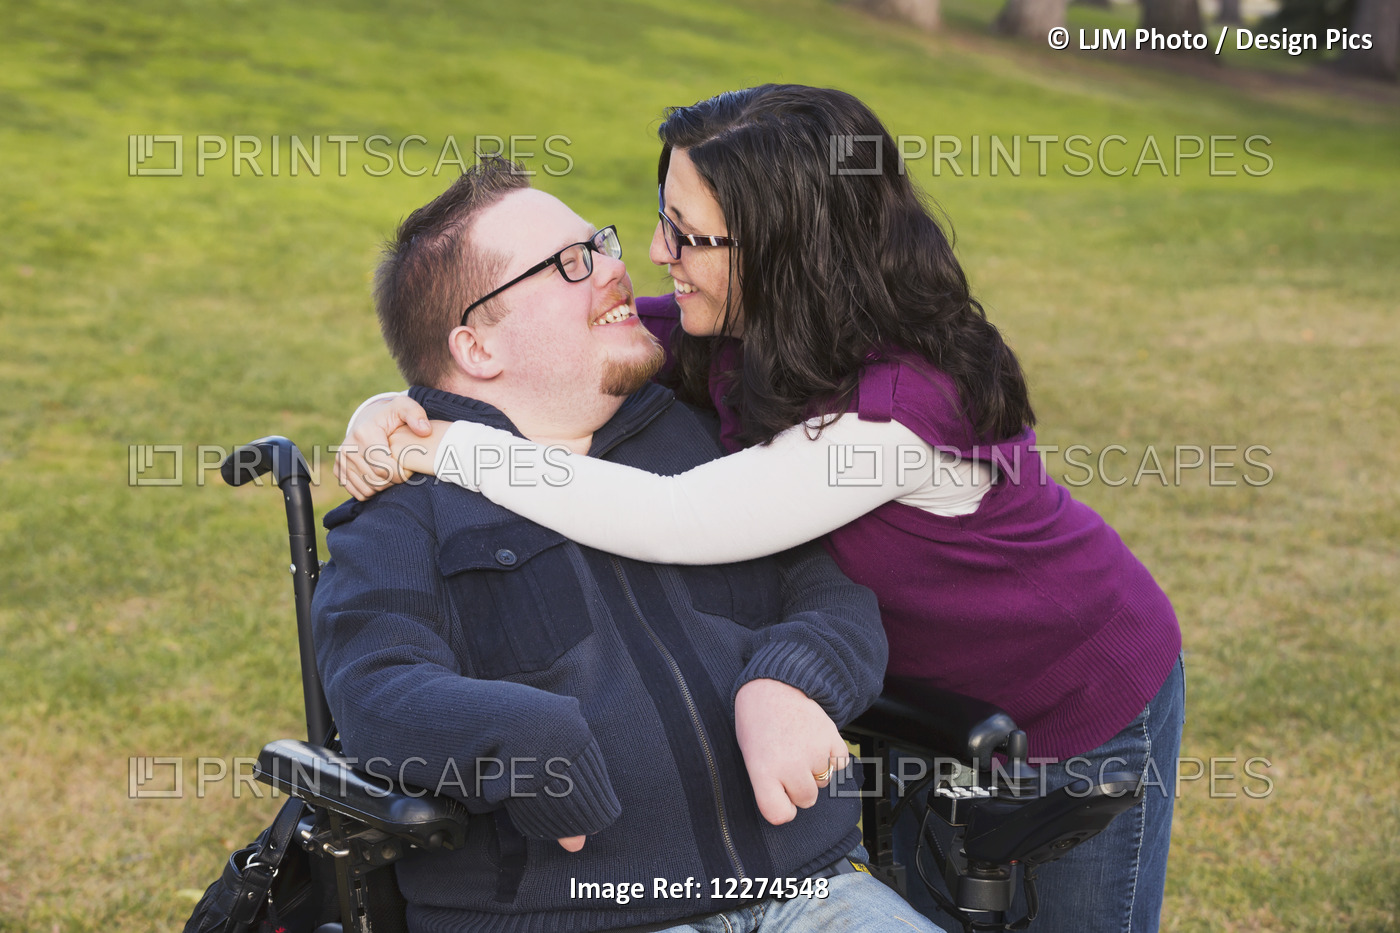 Wife Hugging Disabled Husband In A Park In Autumn; Edmonton, Alberta, Canada